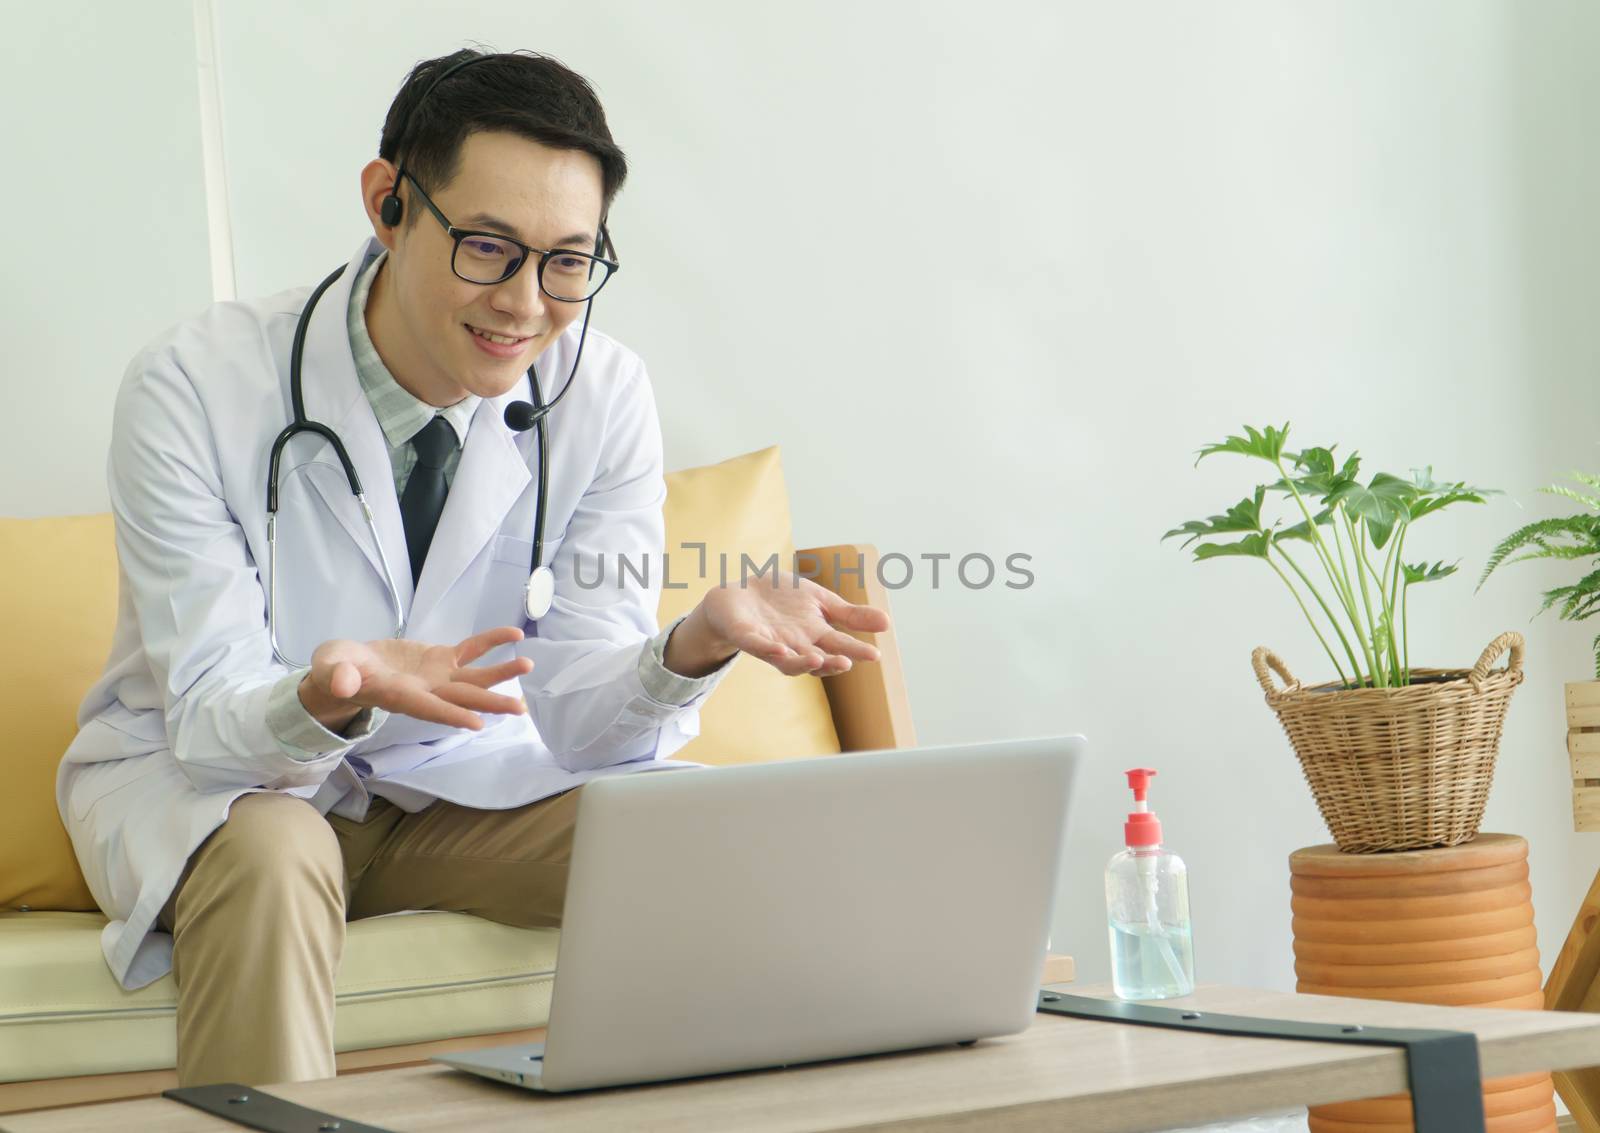 Asian male doctor is using a laptop computer to connect to the internet for online counseling. The medical profession, technology, communication, distance, and people concept